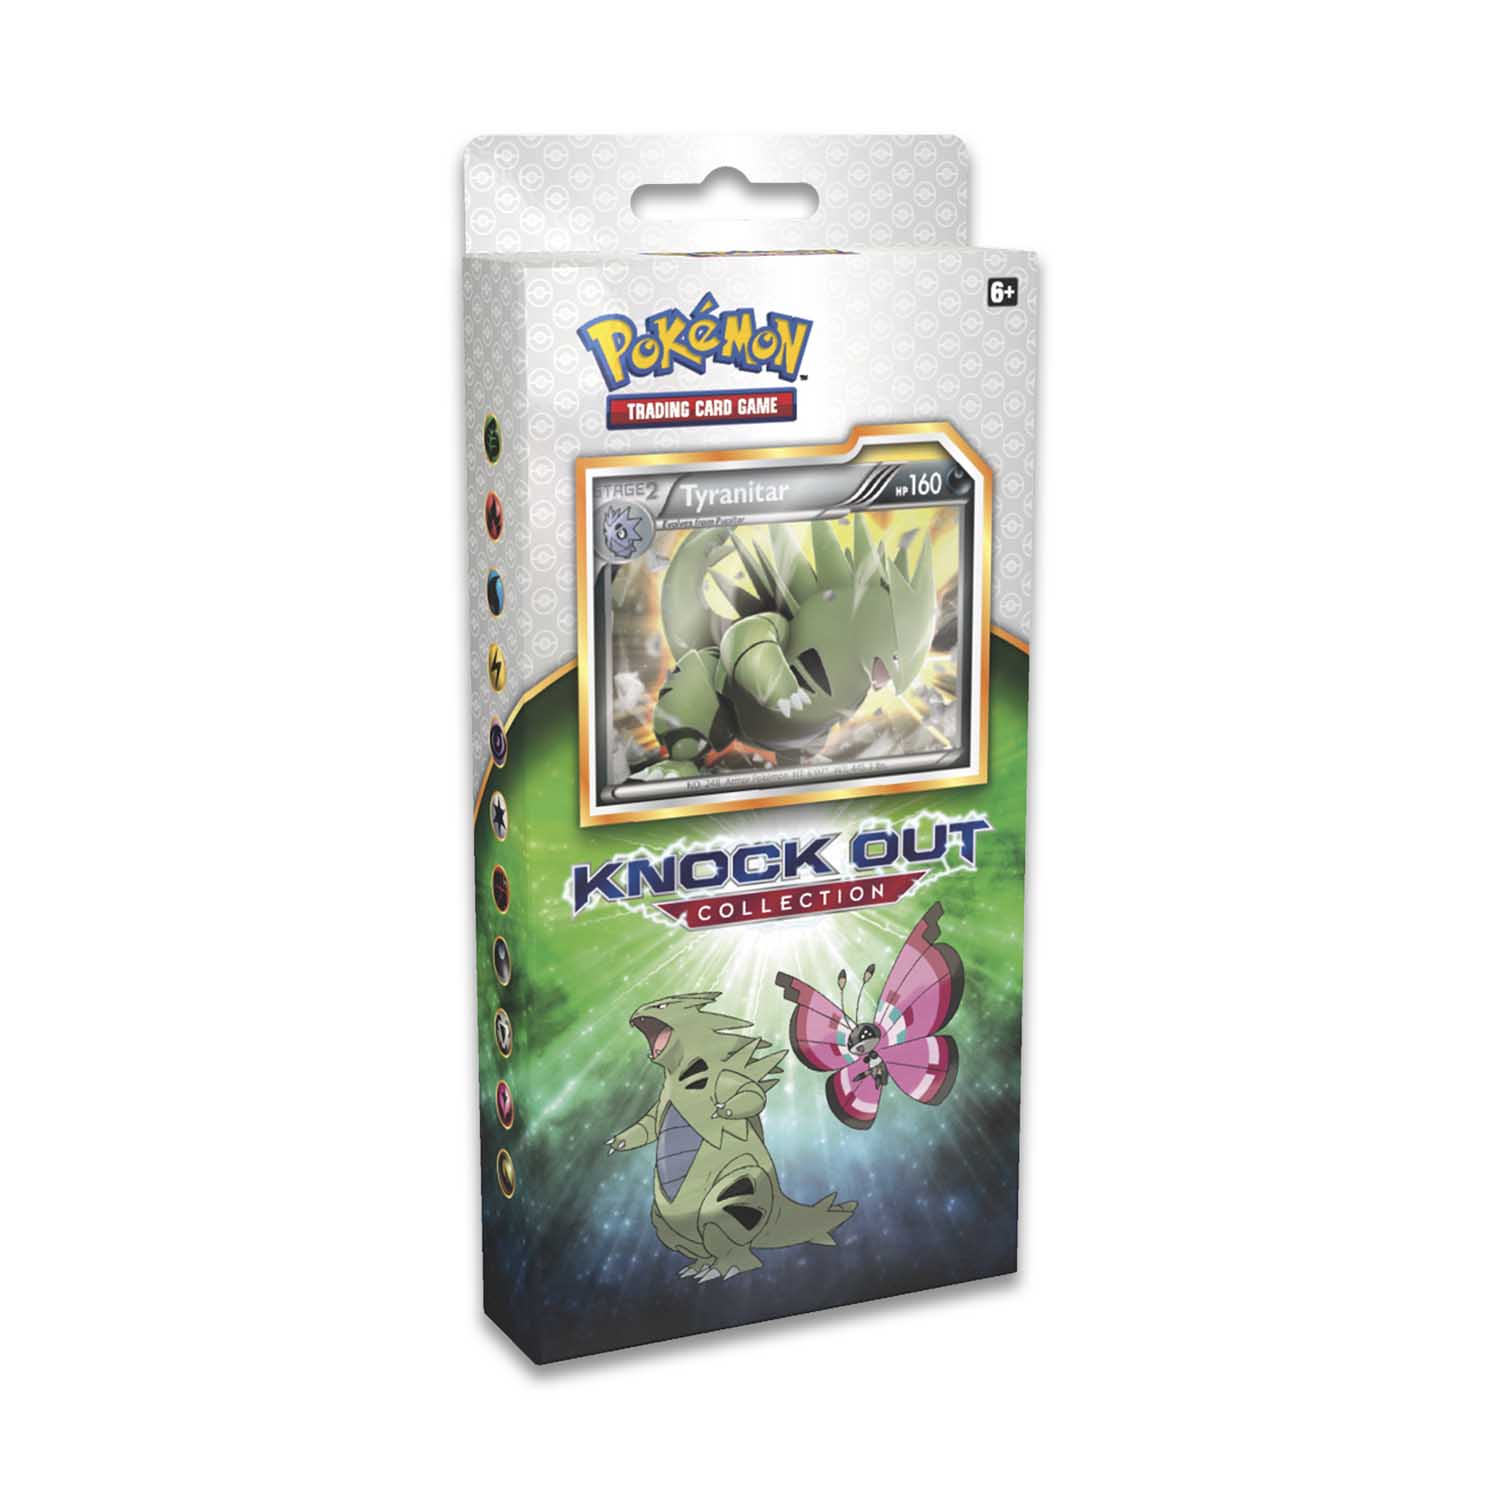 Pokémon TCG Knock Out Collection Booster Packs Trading Card Set for sale online